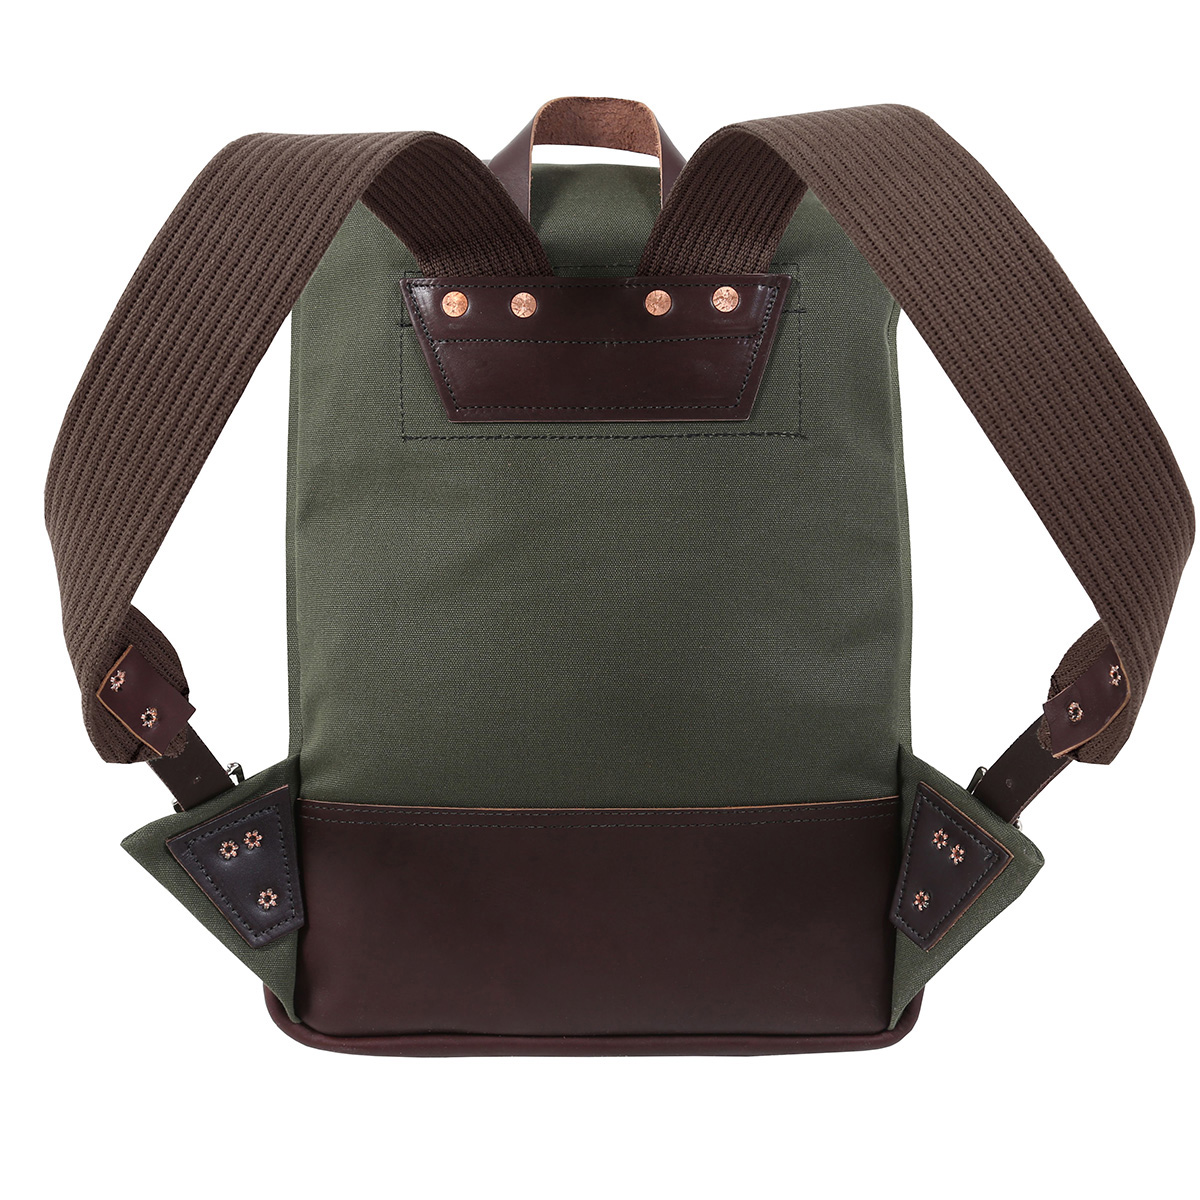 DULUTH PACK DULUTH MINN Deluxe Roll Top Scout Olive Drab Pack (B-1408-OD) - image 3 of 5